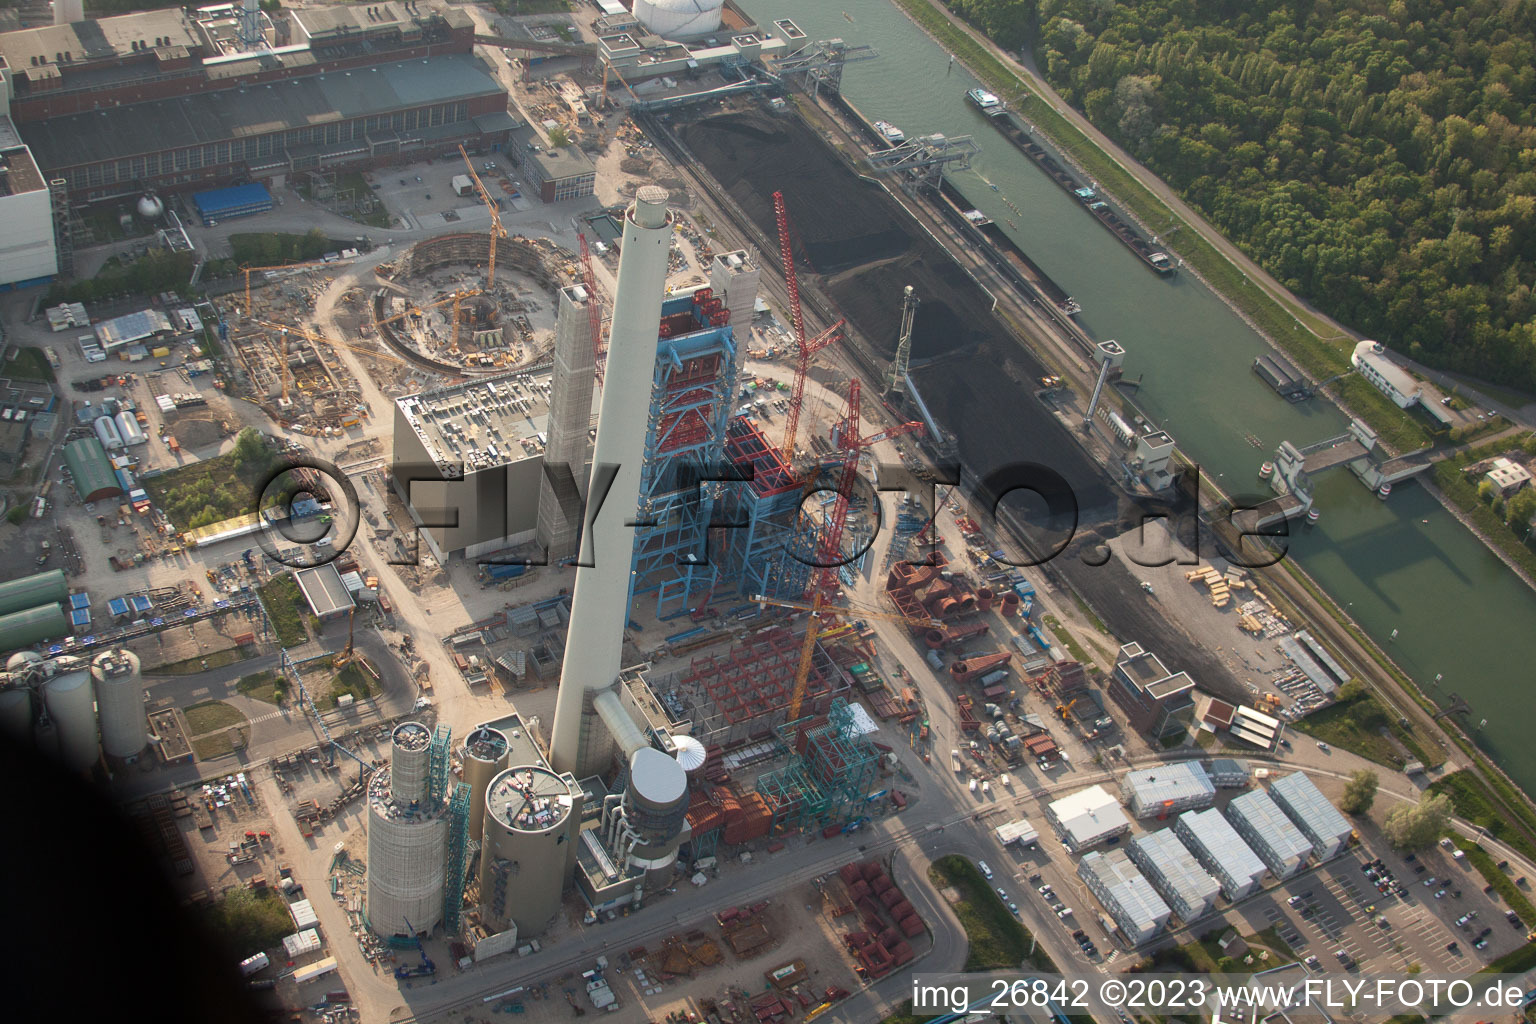 EnBW building new coal-fired power plant on the Rhine in the district Rheinhafen in Karlsruhe in the state Baden-Wuerttemberg, Germany from the plane